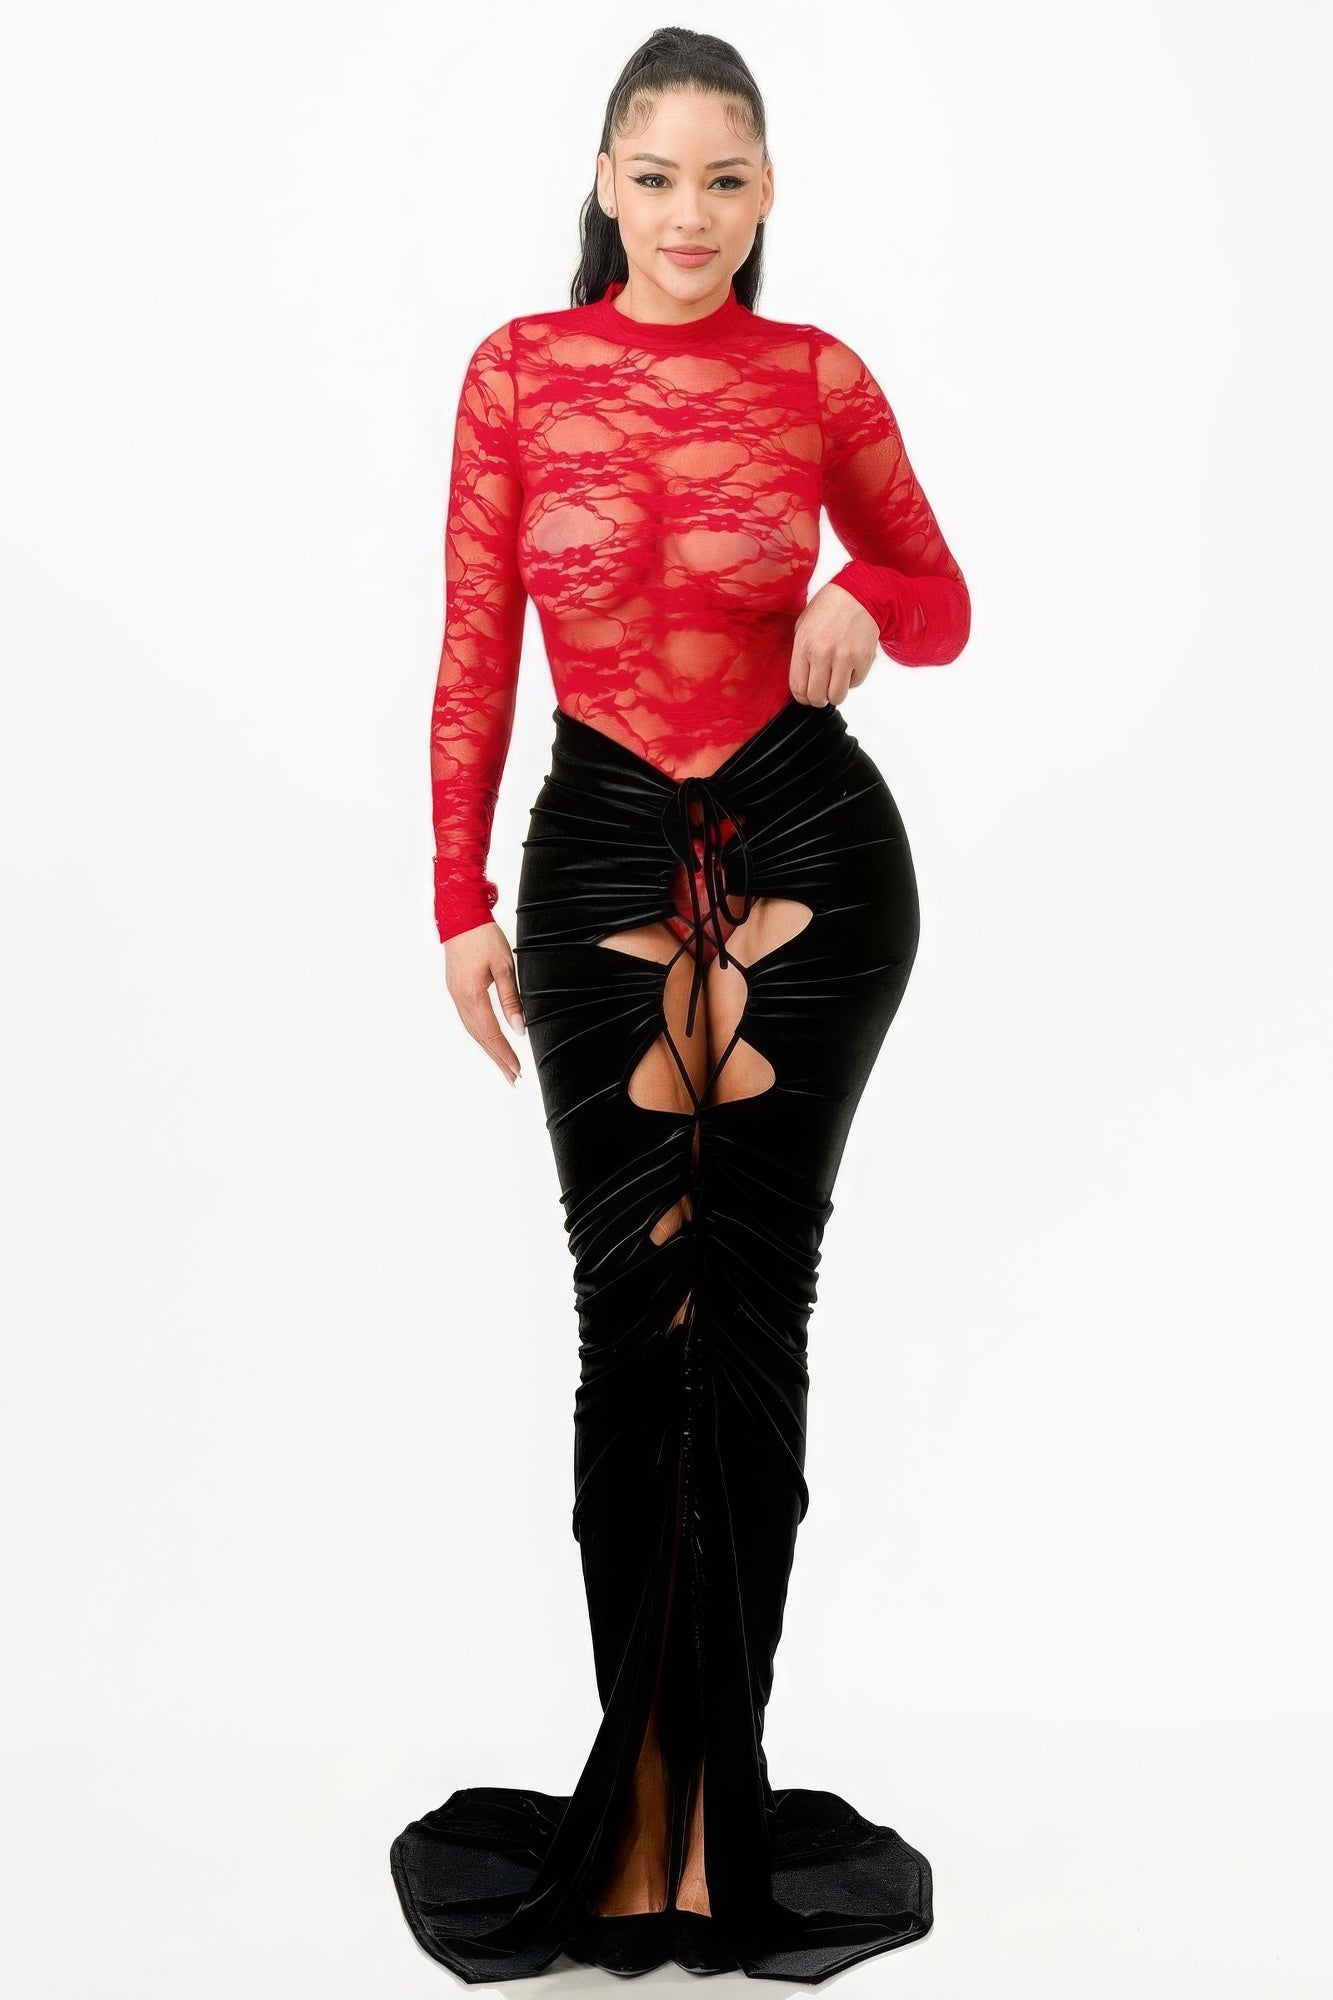 Lace Bodysuit & Mermaid Skirt | APPAREL, CCPRODUCTS, MADE IN USA, NEW ARRIVALS, Red/Black, SETS | Bodiied